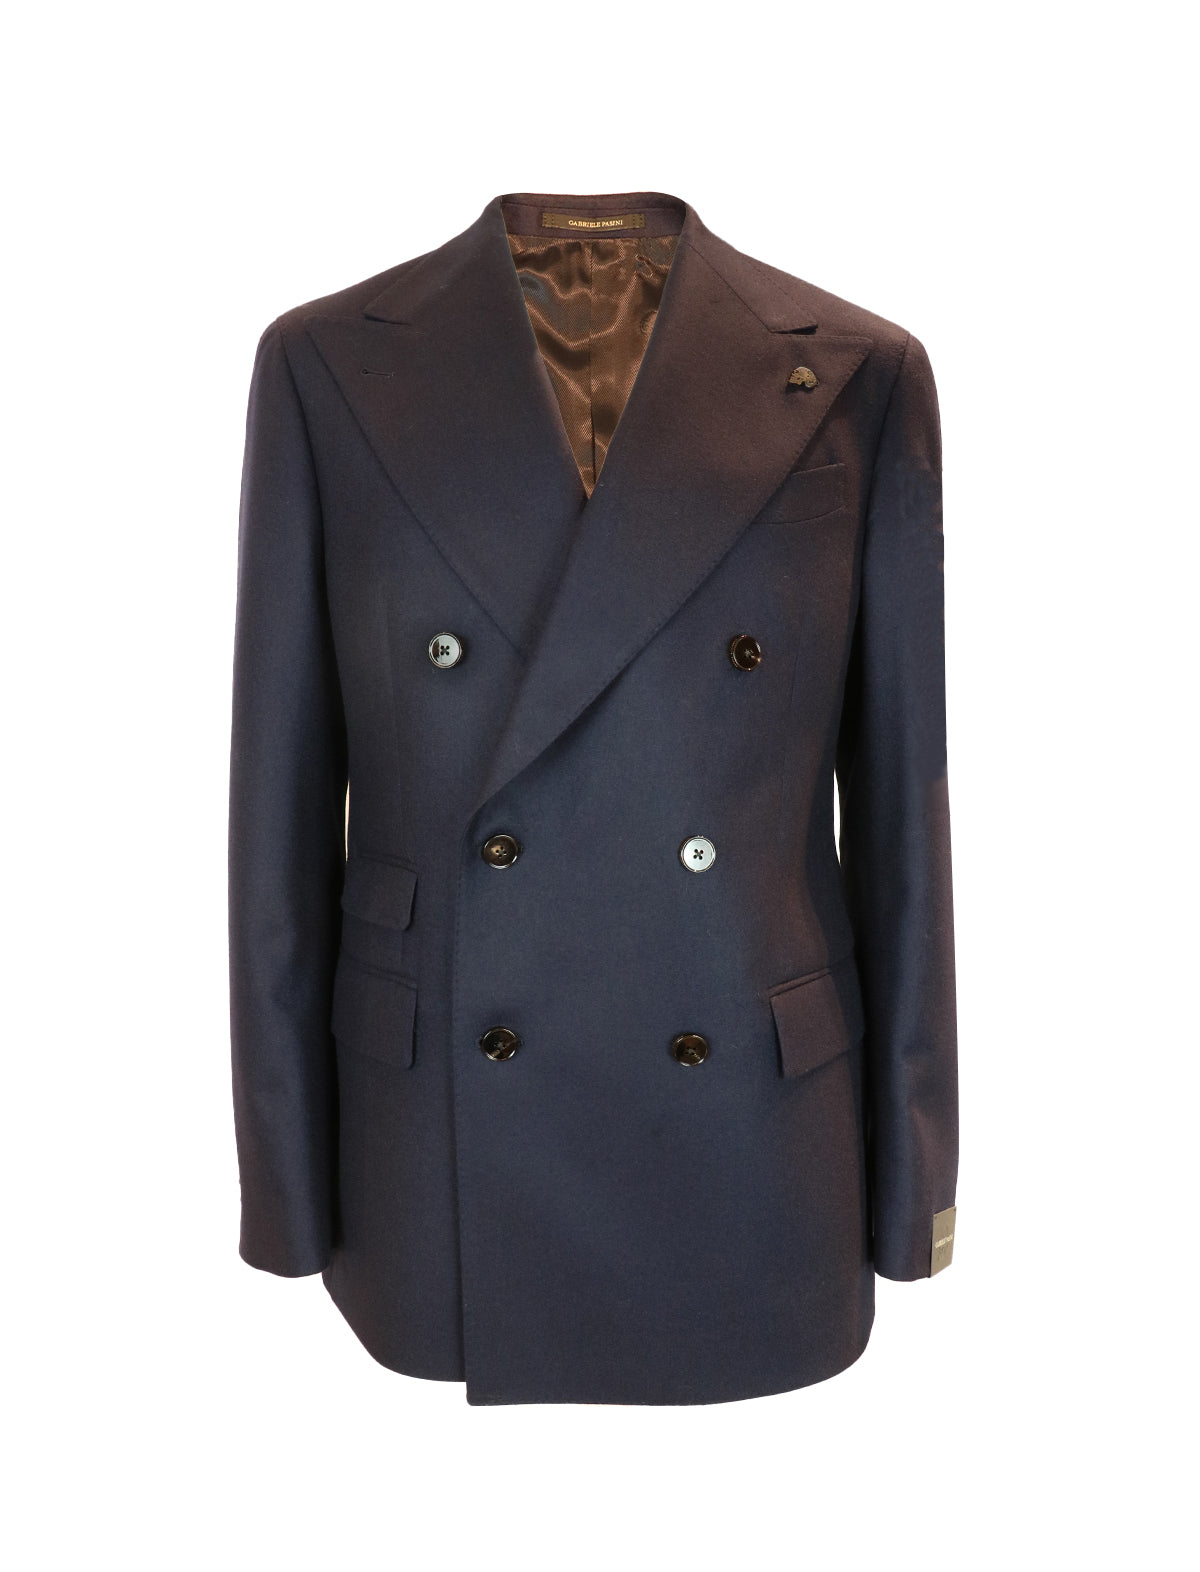 GABRIELE PASINI Double-Breasted Modena Jacket in Navy